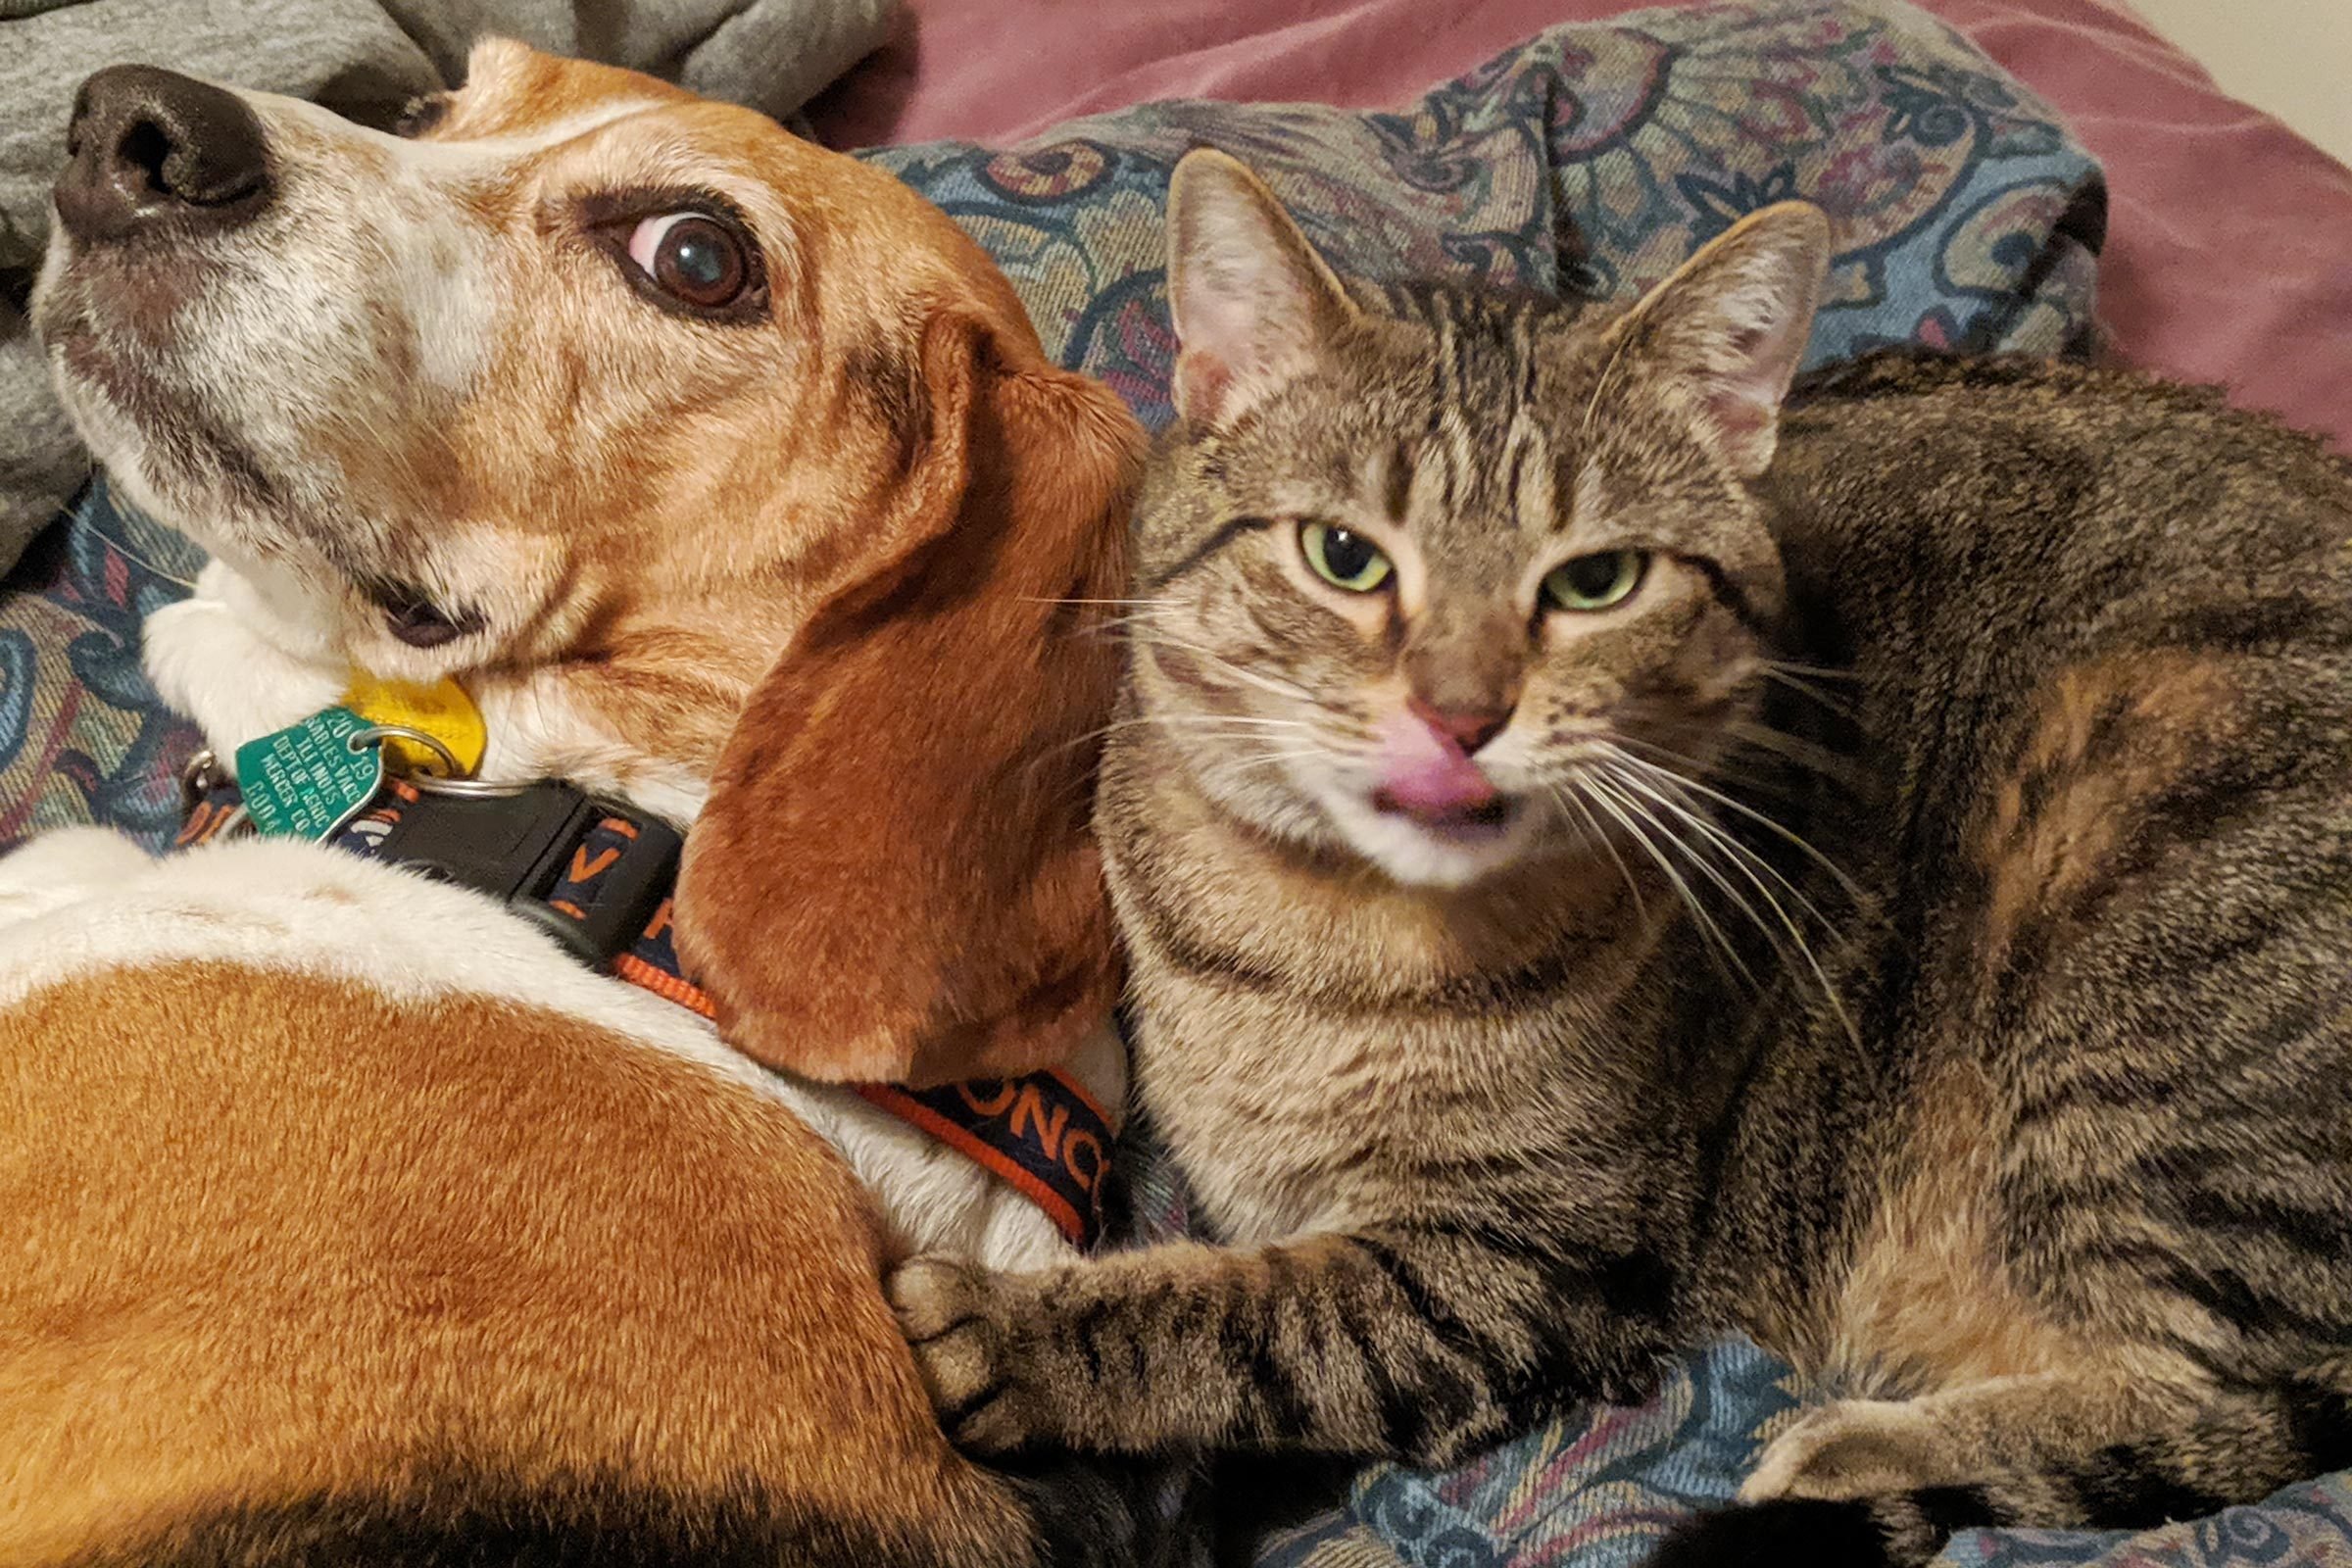 20 Funny Photos of Dogs and Cats Together Reader’s Digest